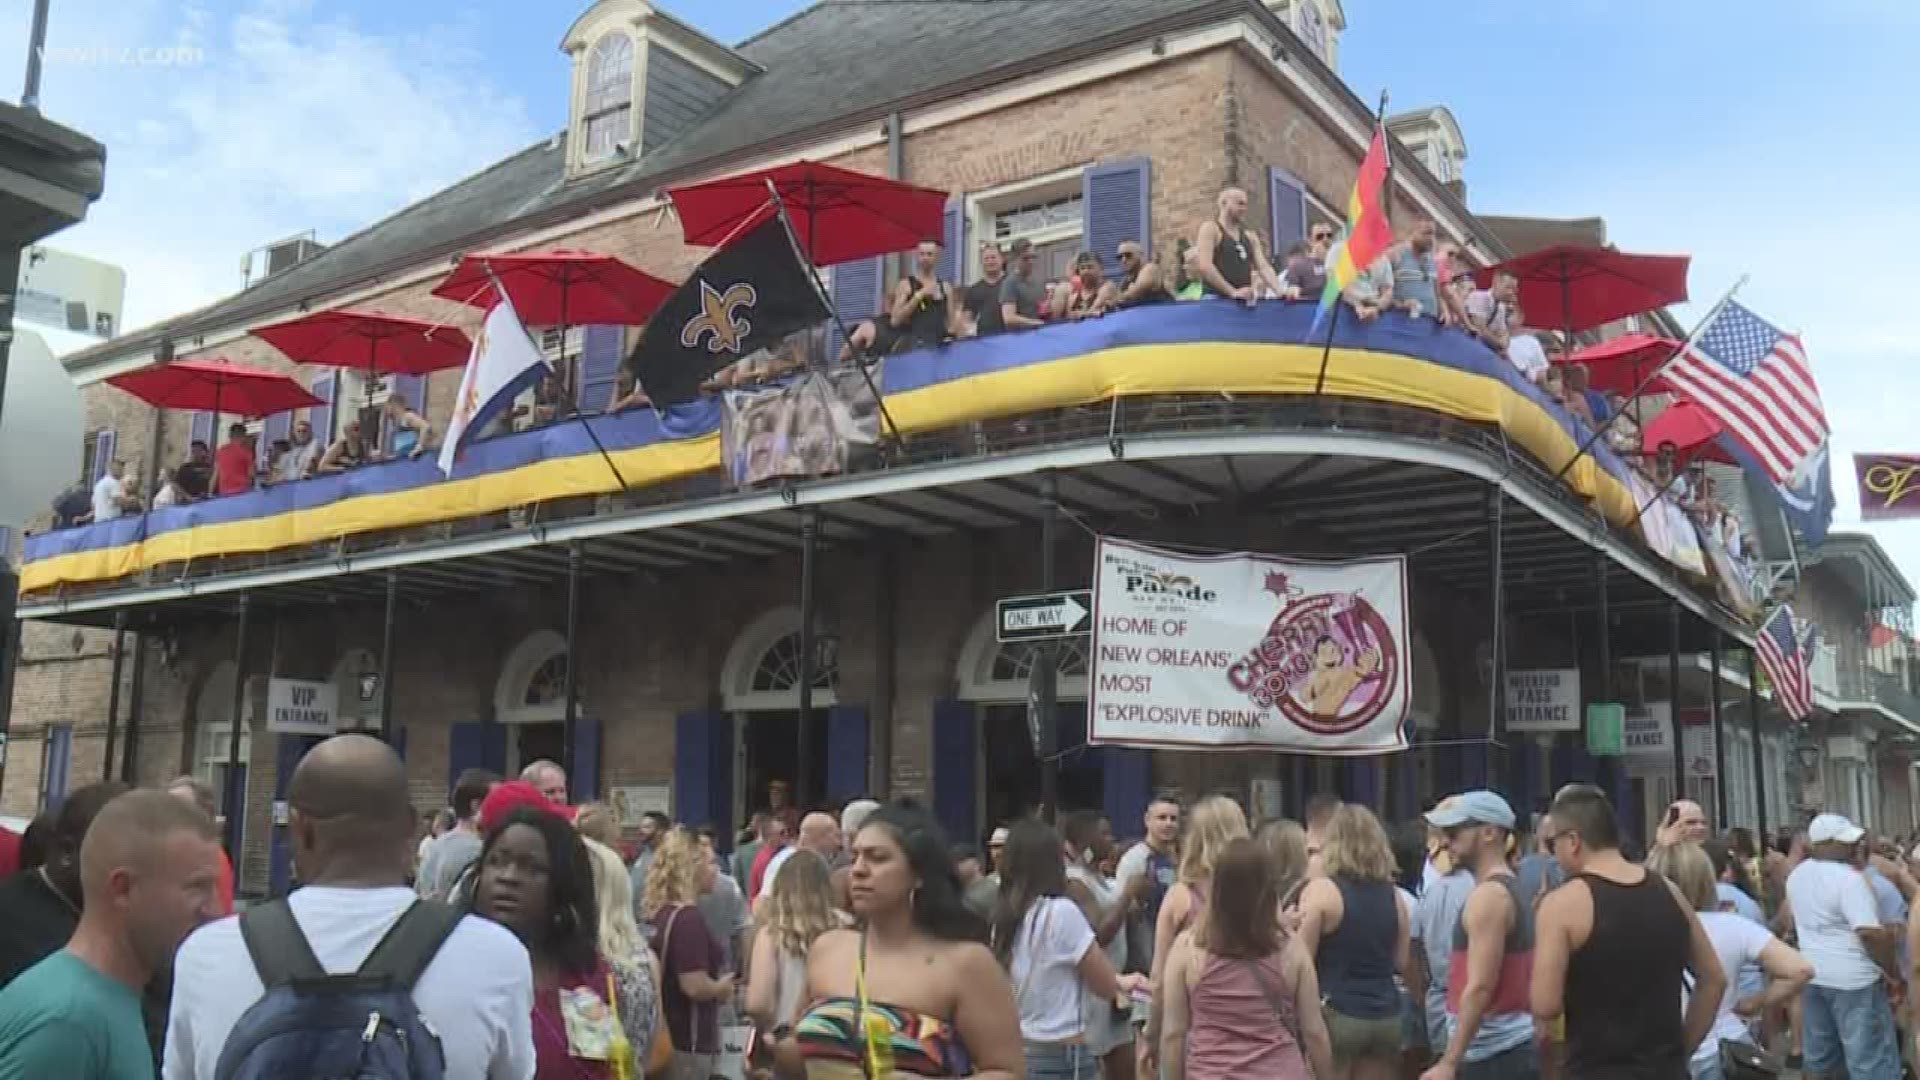 47th annual Southern Decadence in New Orleans this weekend